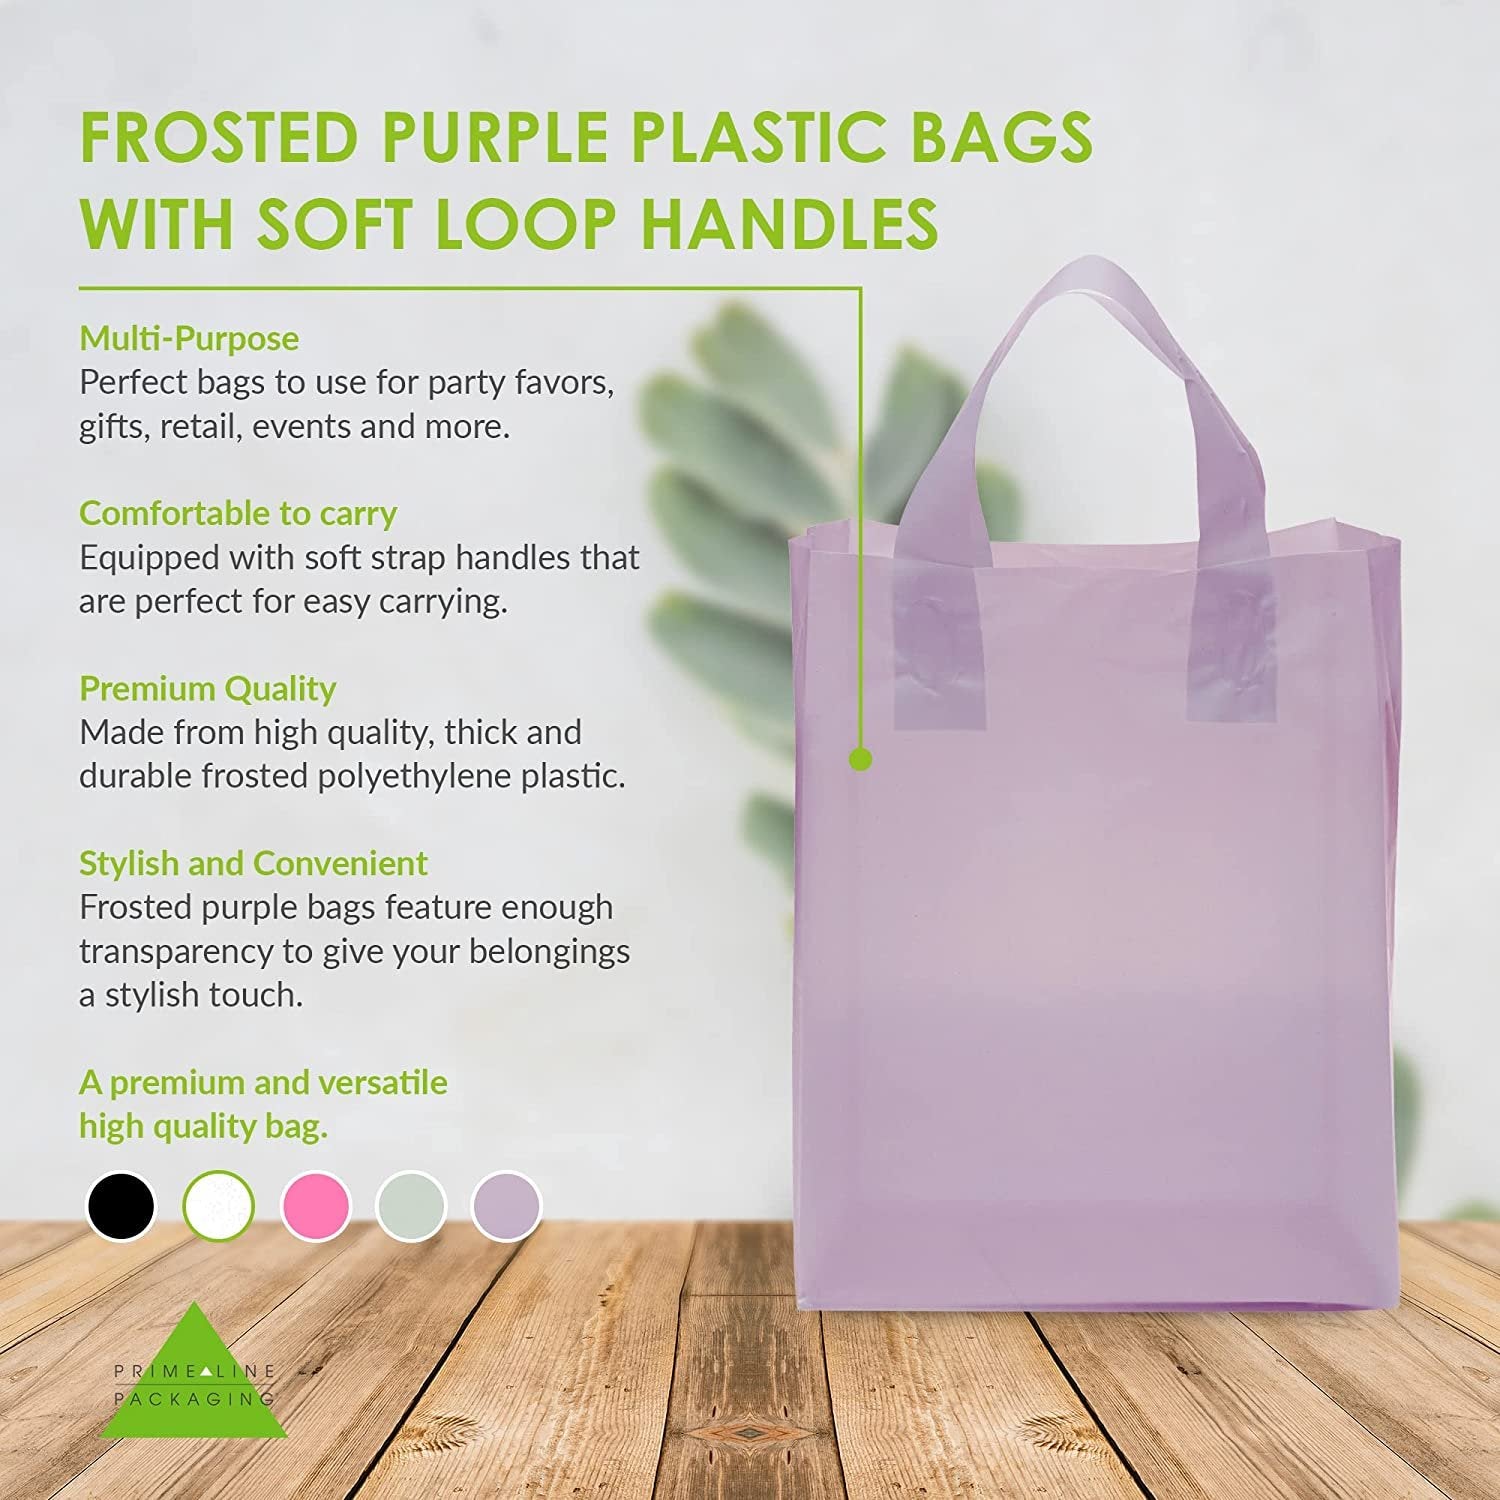 Boutique Bags - 8x4x10 Inch 100 Pack Small Clear Frosted Purple Plastic Shopping Bags with Handles for Small Business, Retail, Merchandise, Delivery & Take Out, Goodie & Party Favor Bags, in Bulk